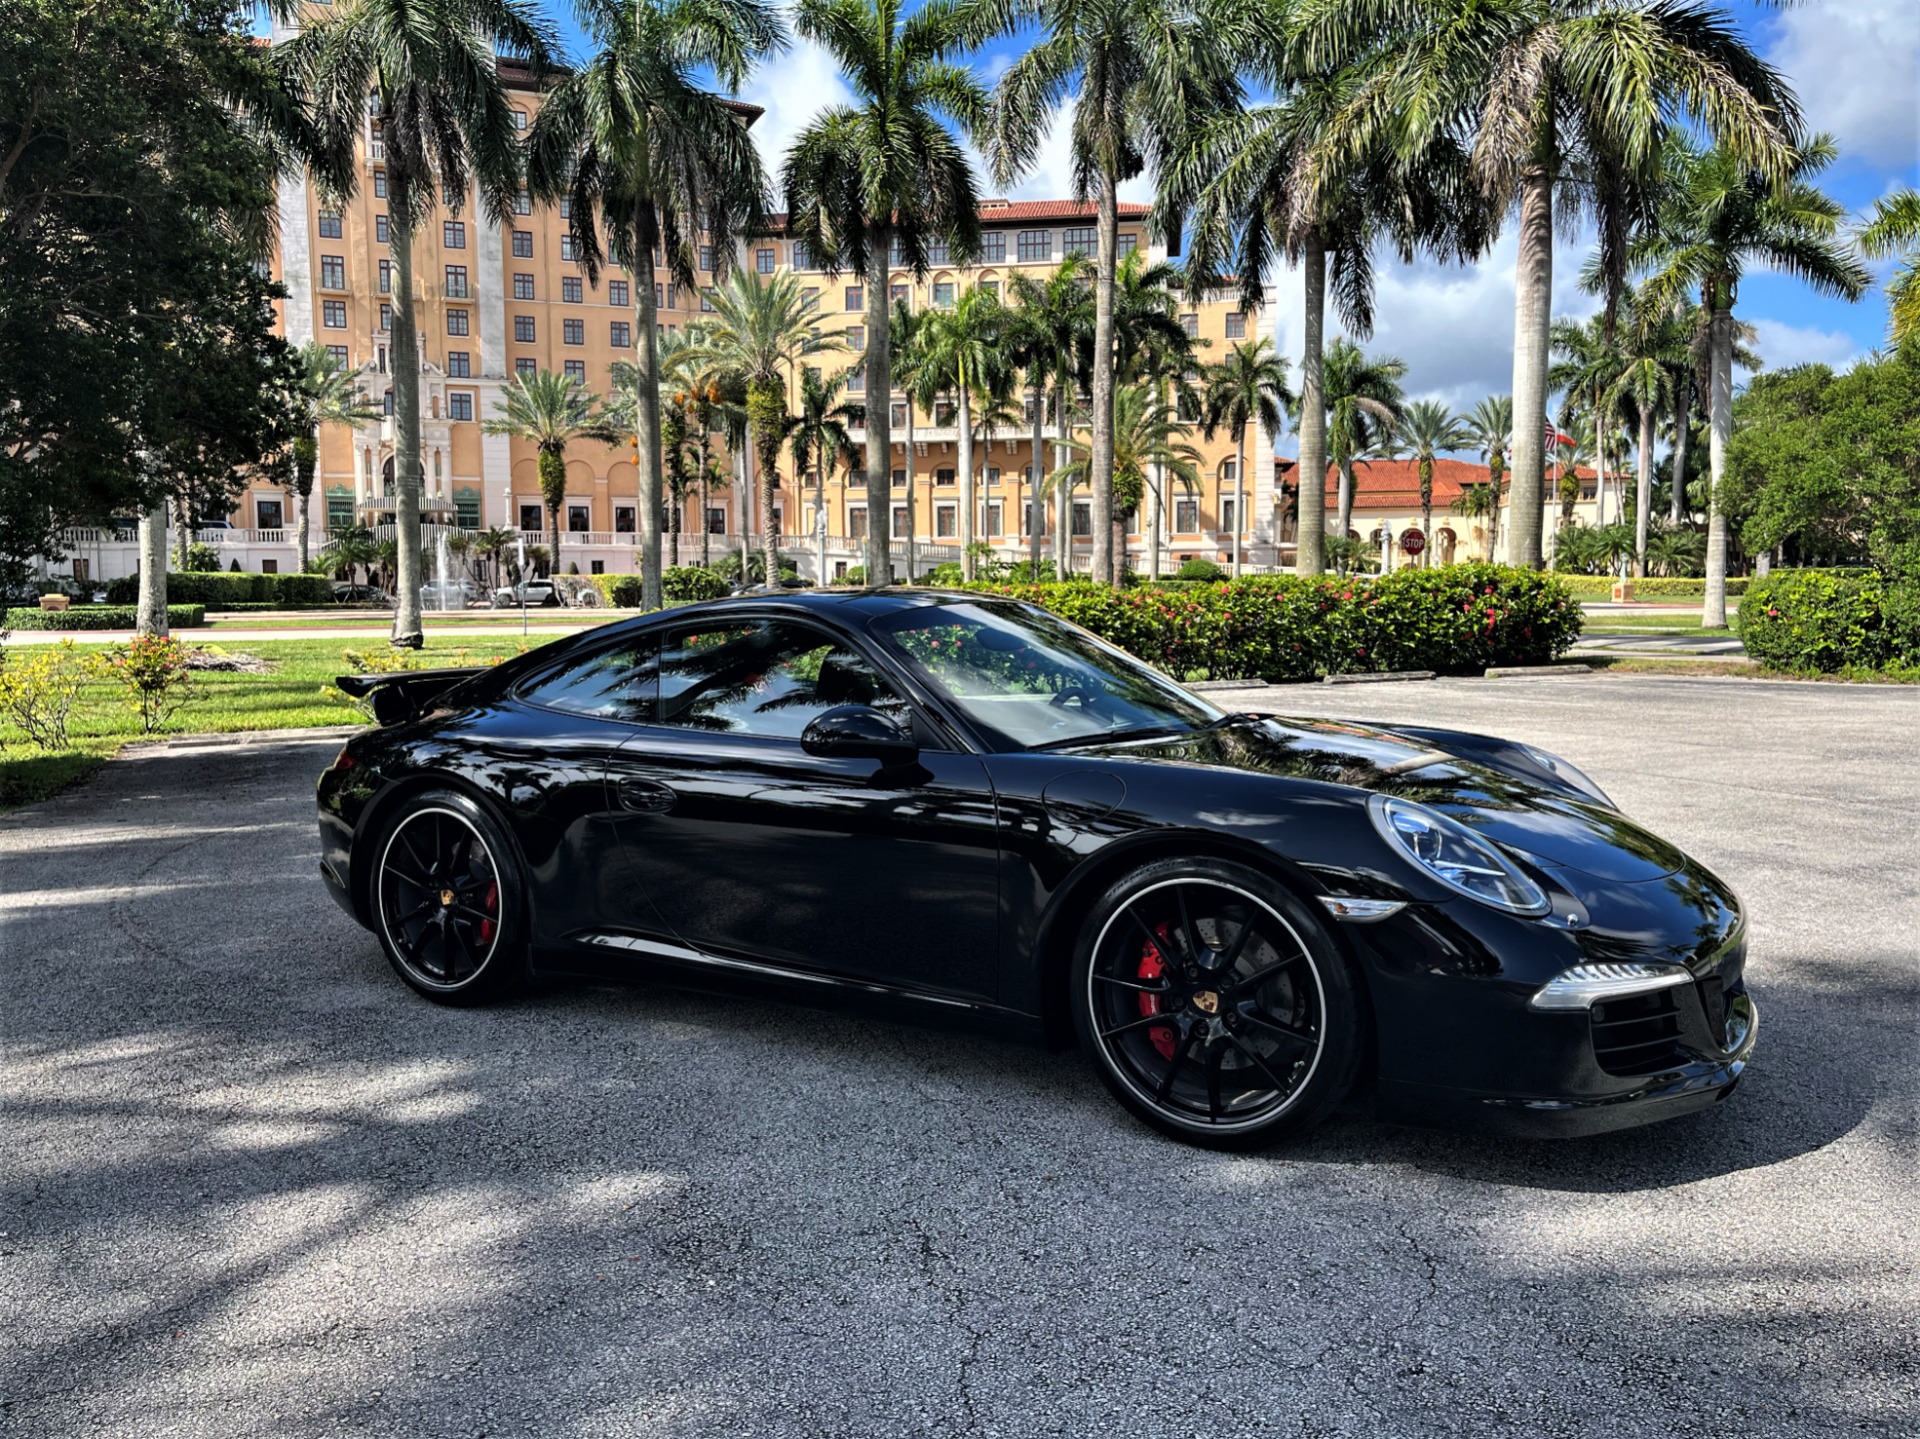 Used 2013 Porsche 911 Carrera S for sale Sold at The Gables Sports Cars in Miami FL 33146 1